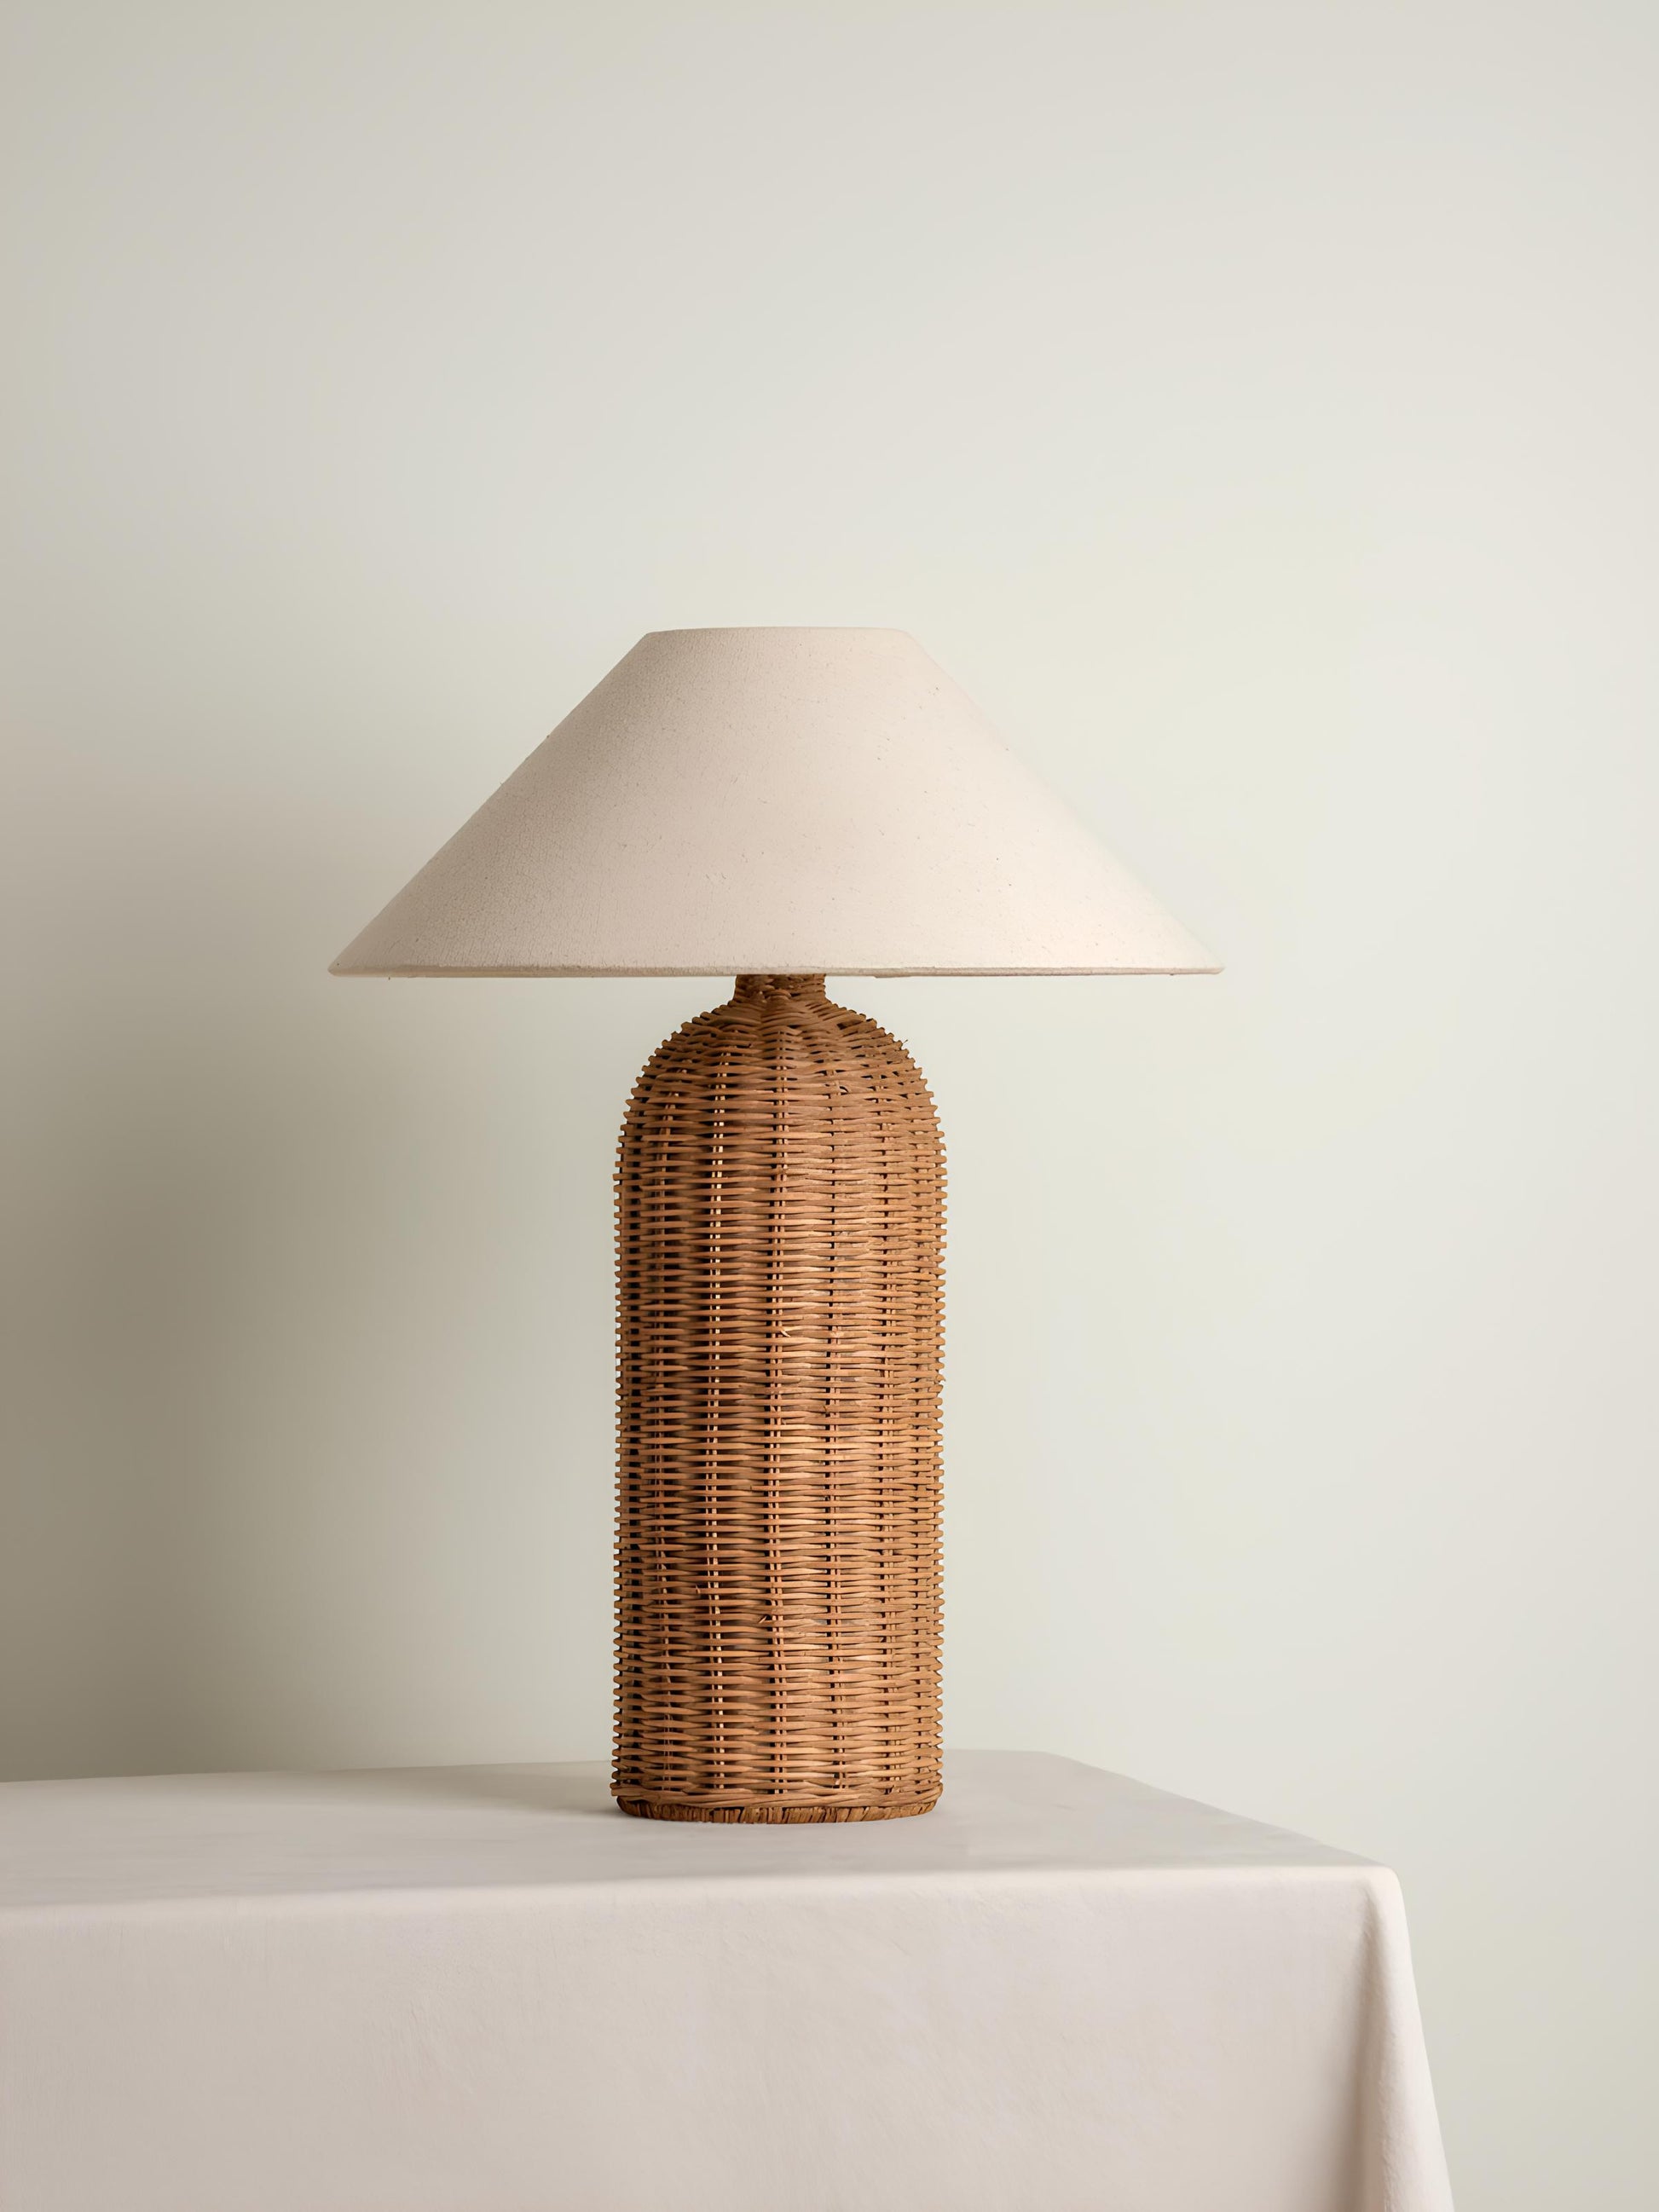 Rattan Table lamp for Living room | Bamboo Bedside table lamp | Cane Table lamp -Rebecca - Akway